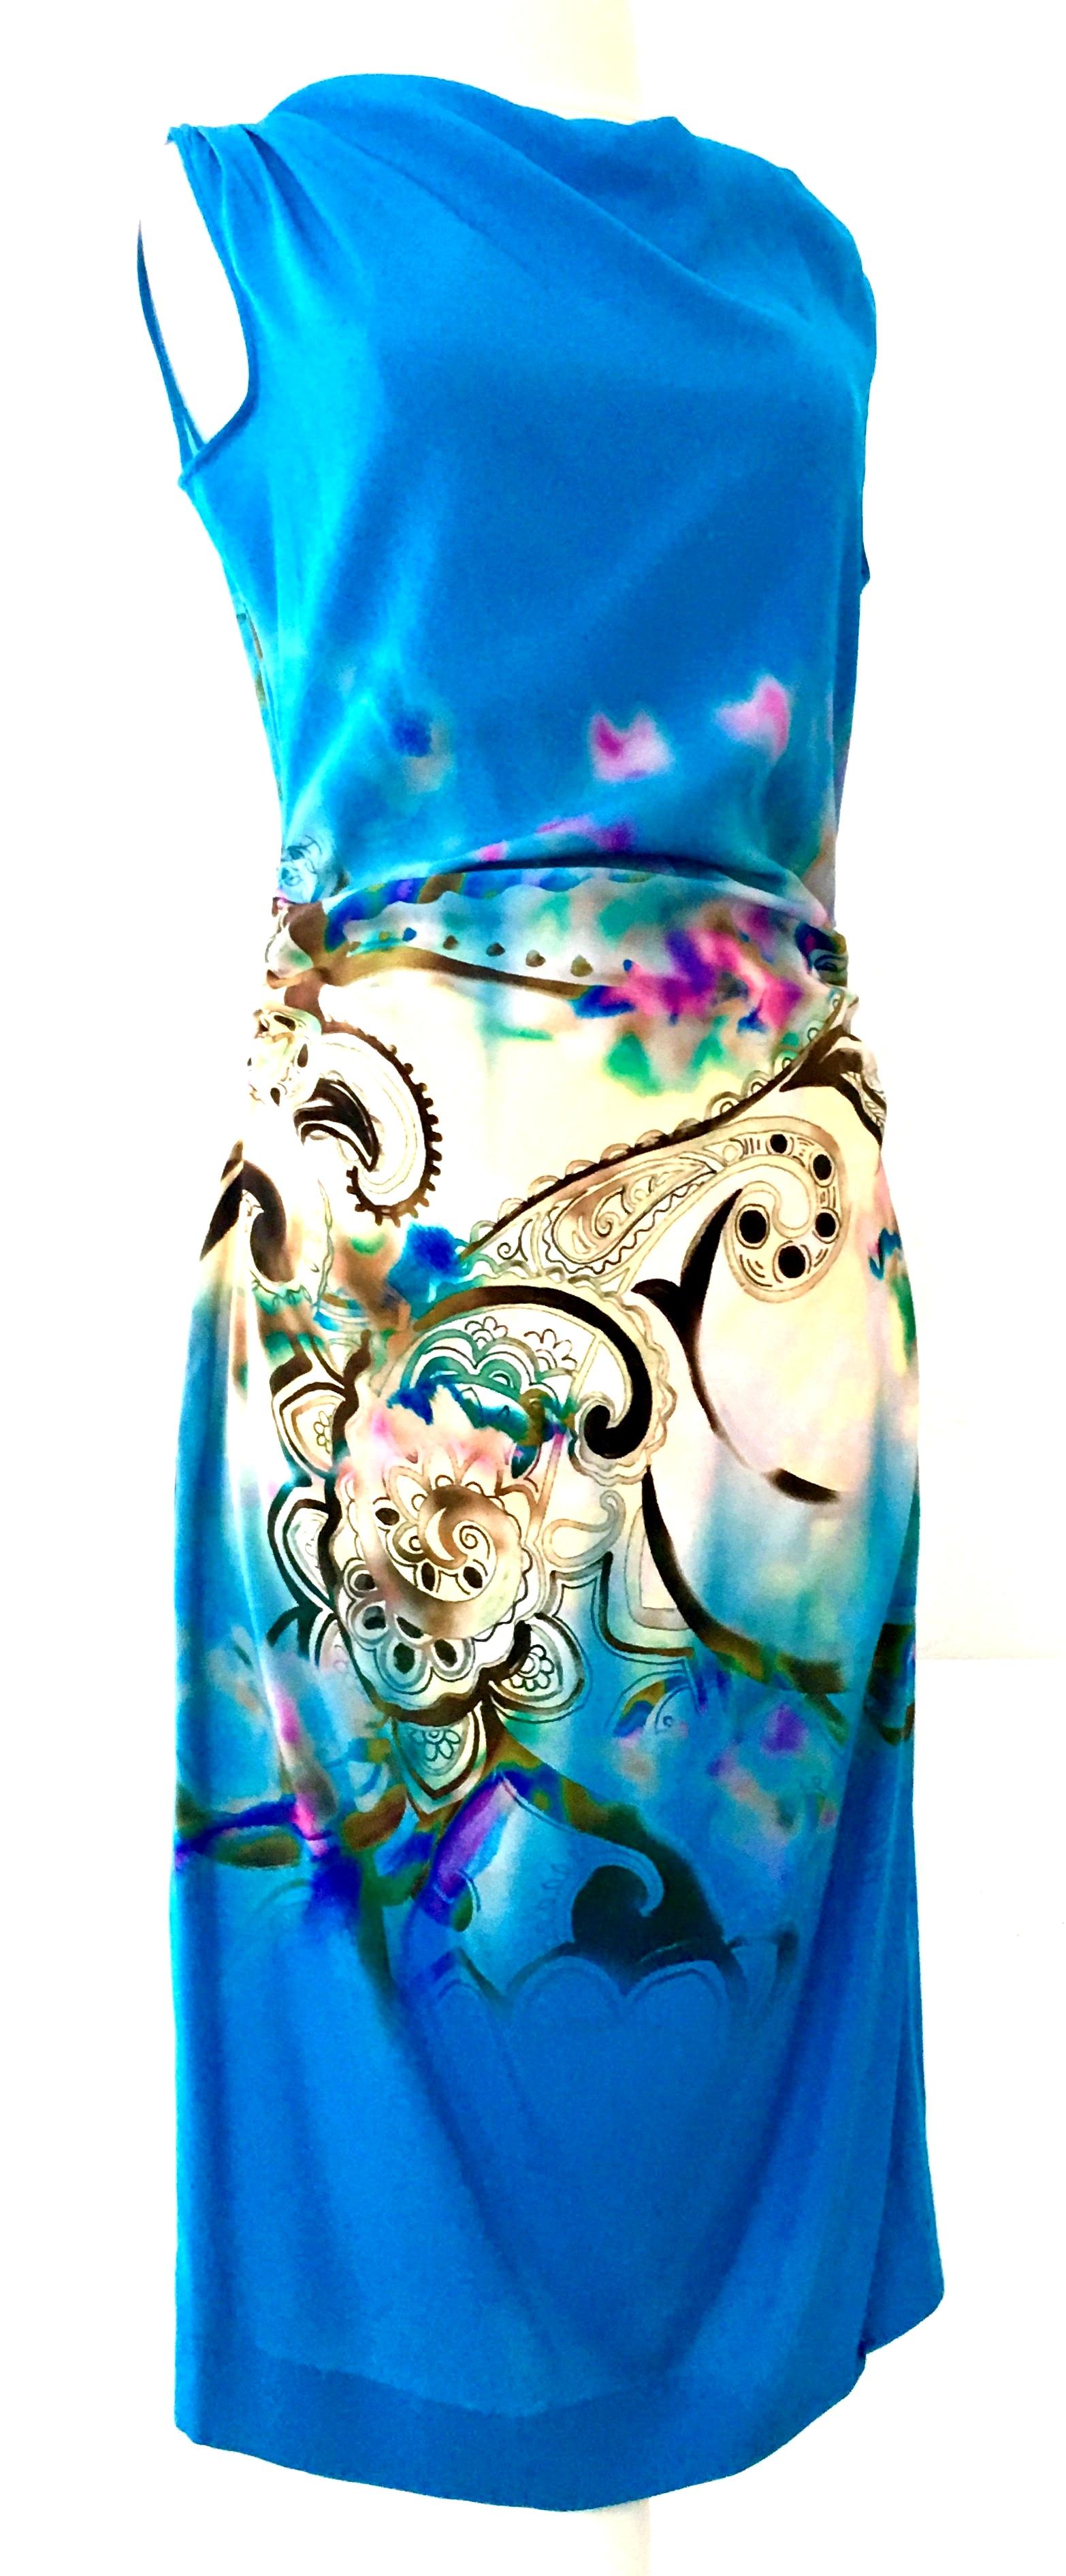 21st Century Modern & New Italian 100% Silk Print Shift Dress By, Etro. This silk turquoise with paisley and abstract print dress is new with original manufacturer and retail tags present. It features a vivid turquoise ground with a paisley and